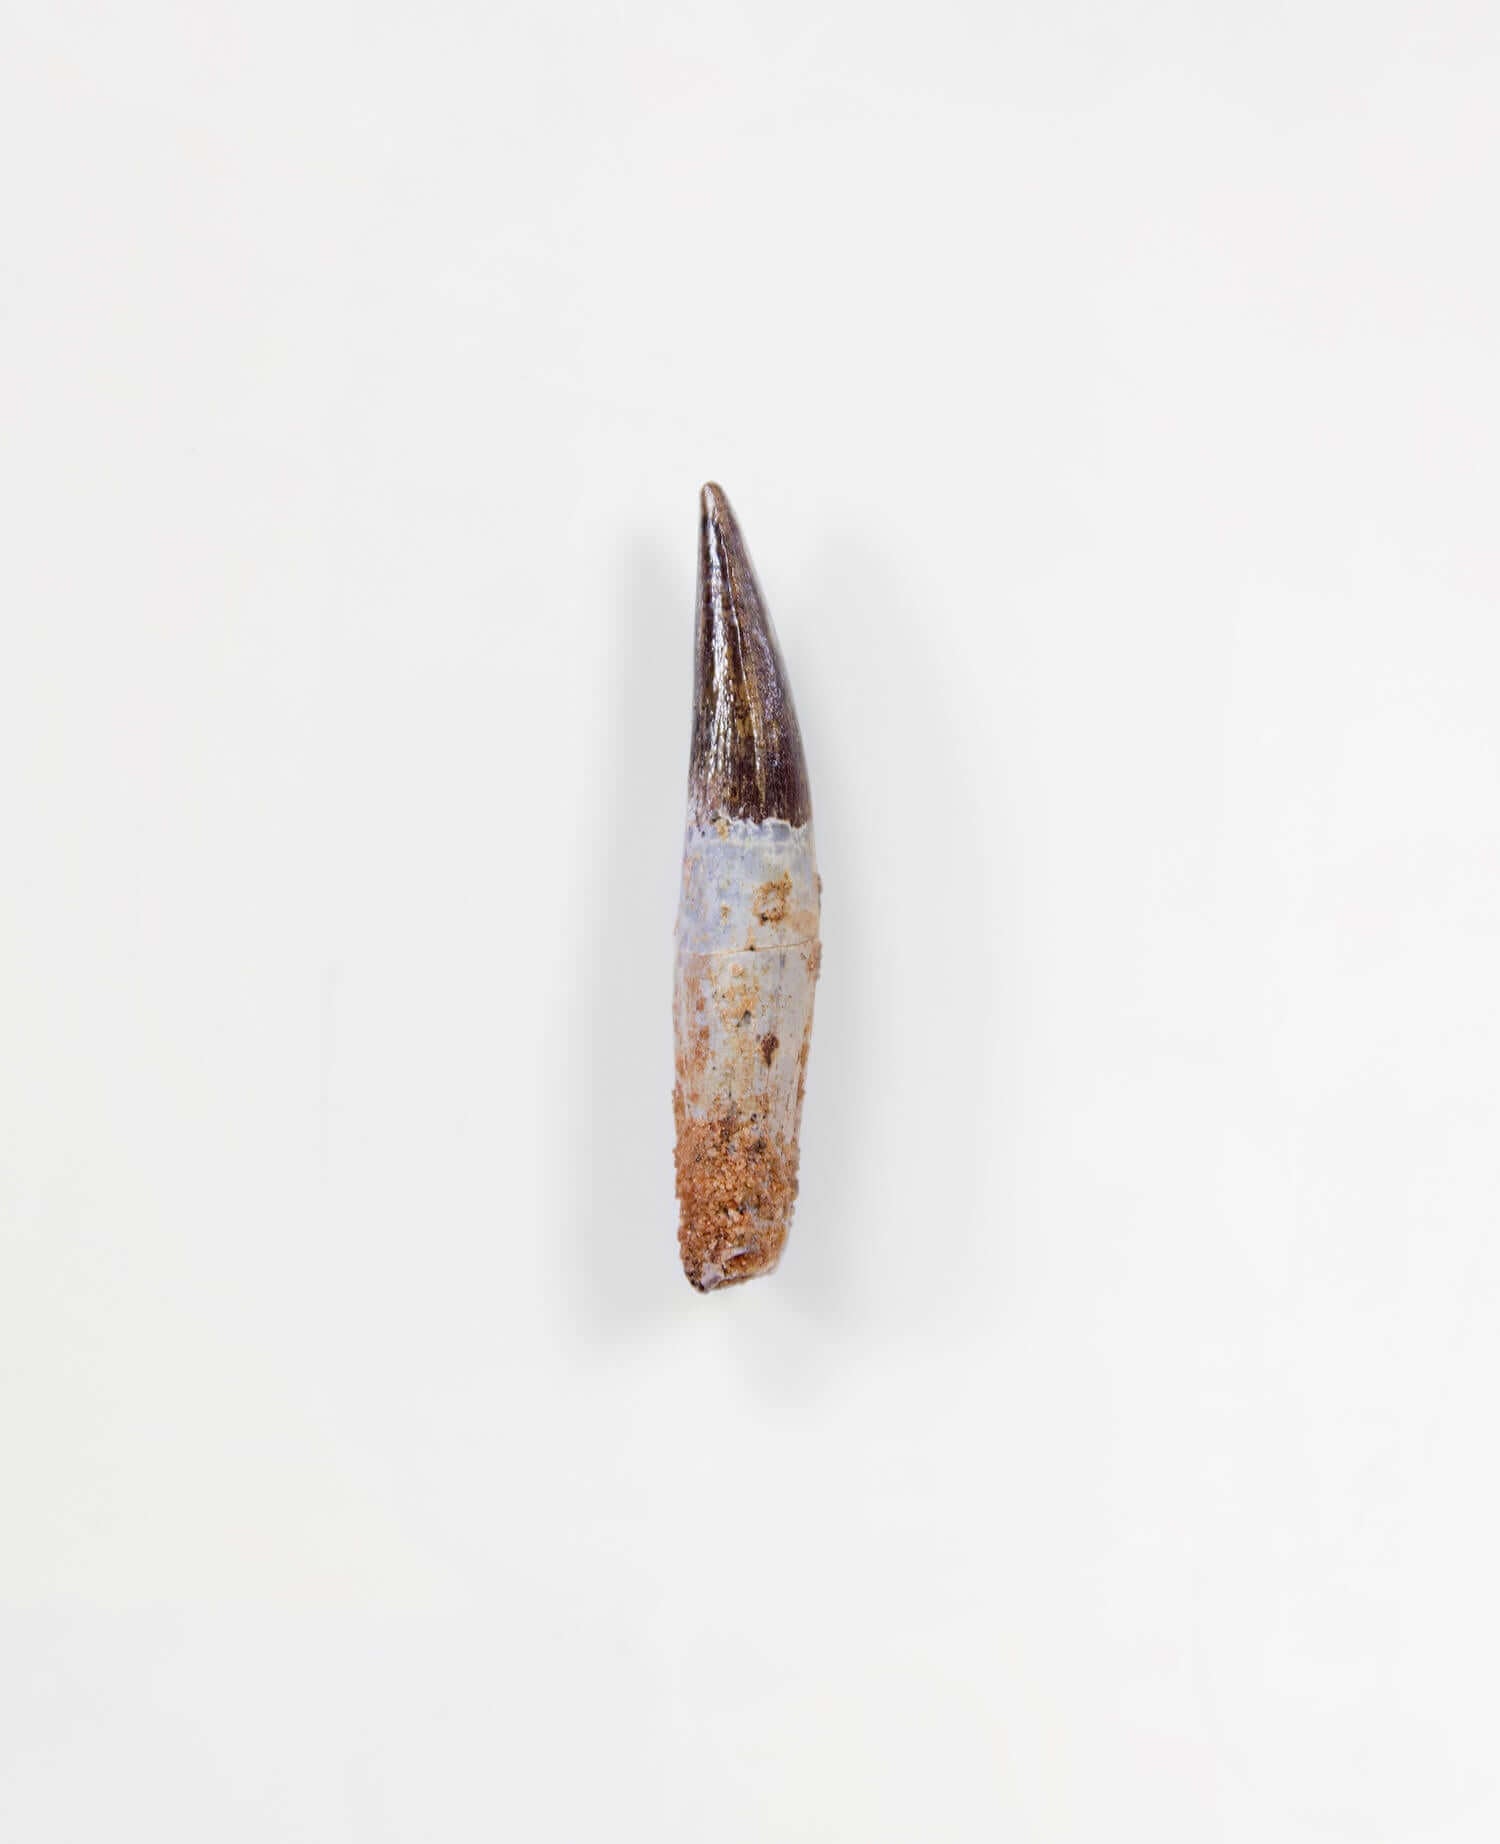 Scientifically important Spinosaurus aegyptiacus dinosaur fossil tooth for sale measuring 48mm at THE FOSSIL STORE